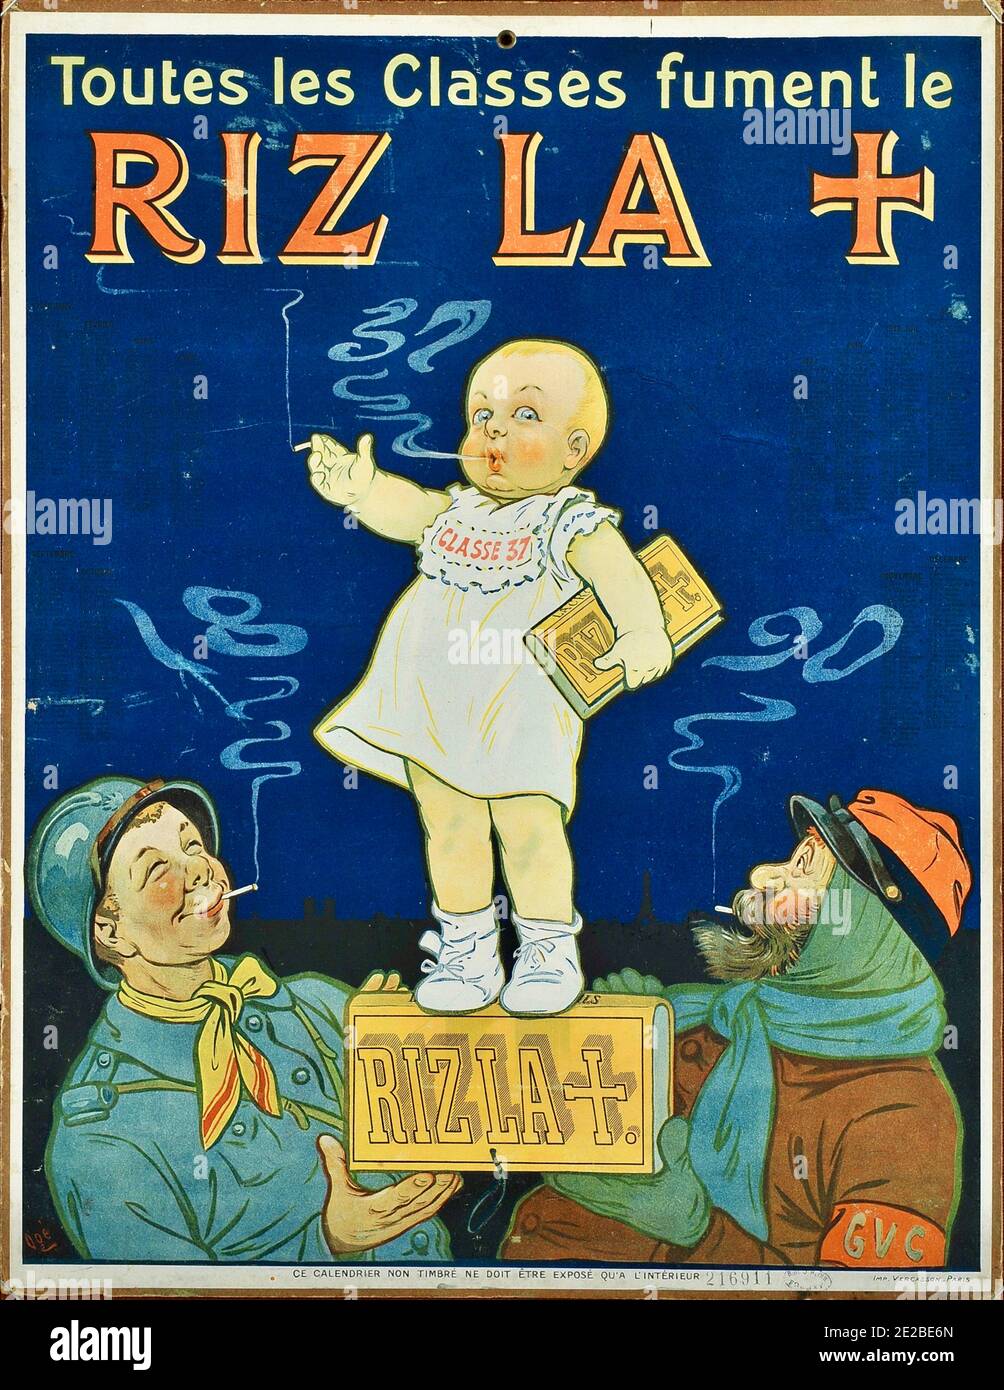 Vintage advertising poster using an image of a child to promote the sale of riz-la cigarette papers and a life long habit of smoking. Stock Photo